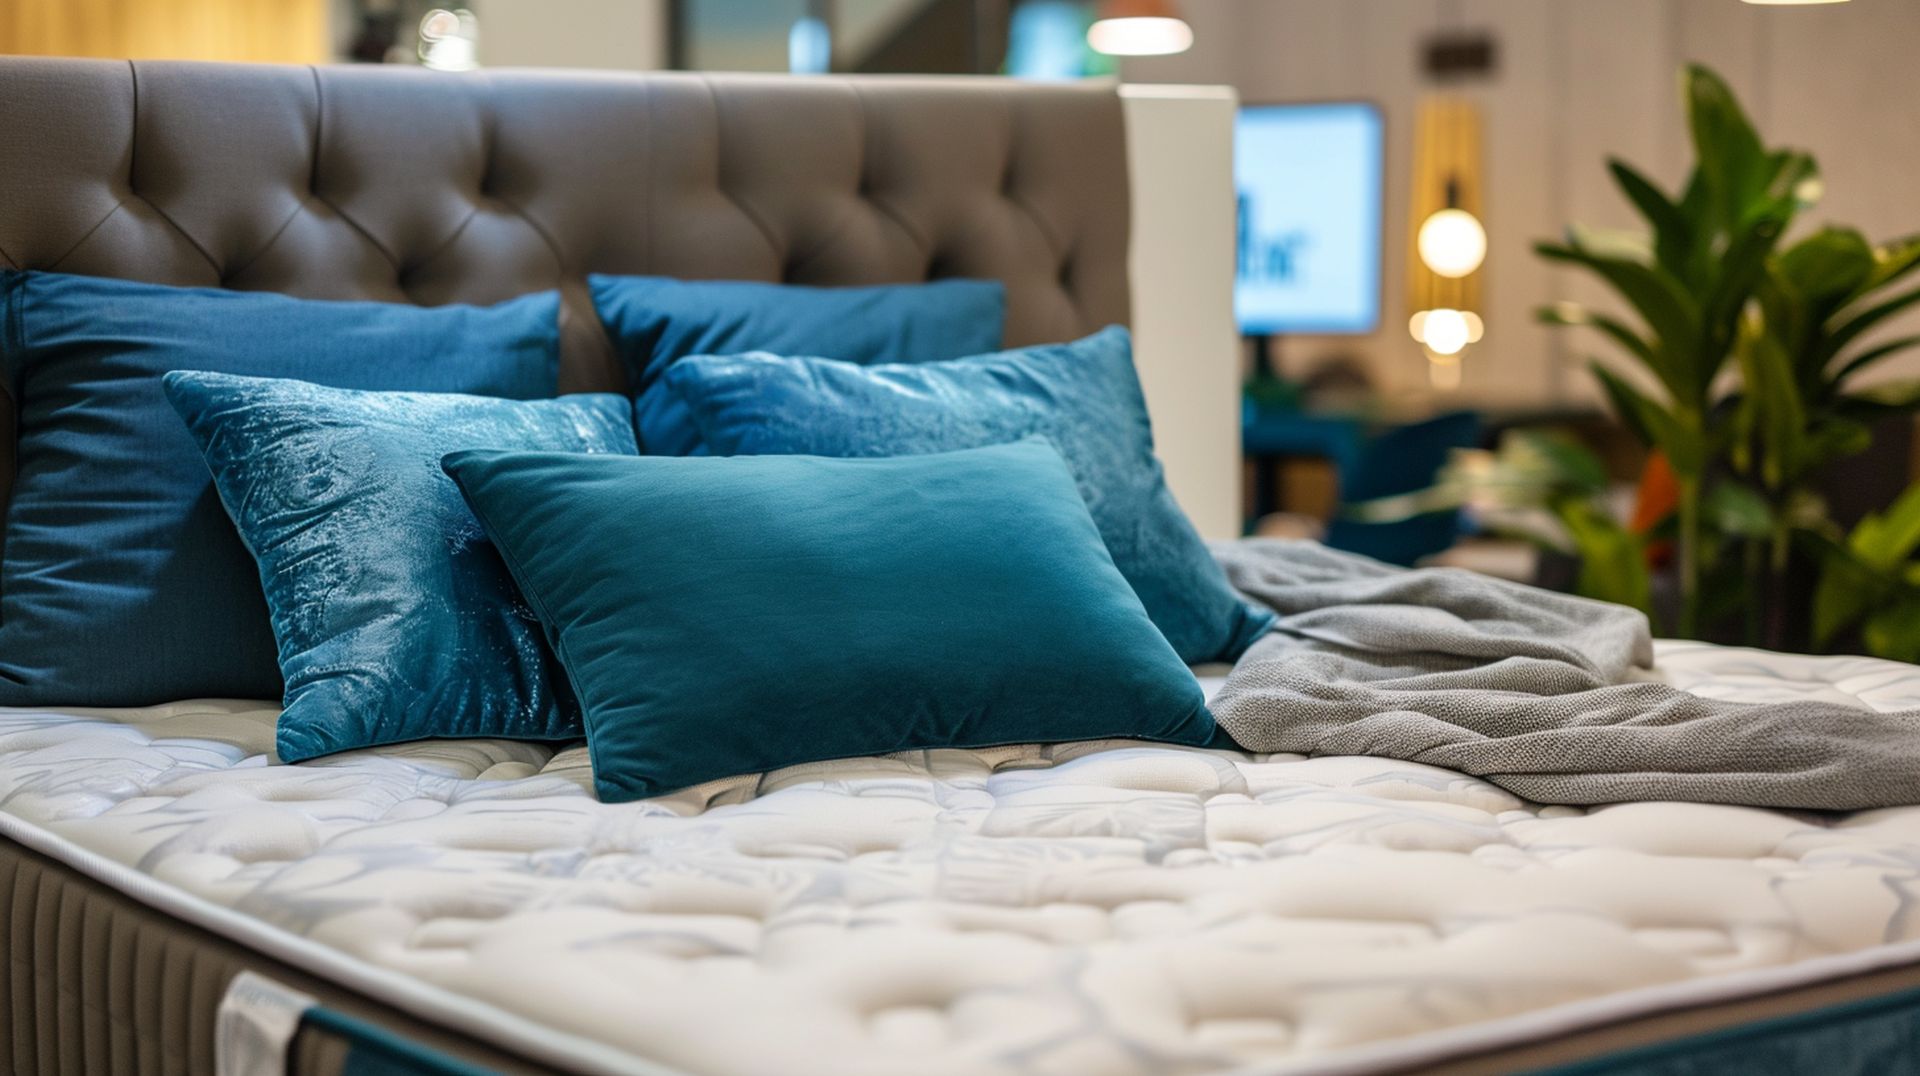 If you're looking for a new bed, mattress stores in Riverton offer the best customer and delivery service, financing, and warranties in Utah